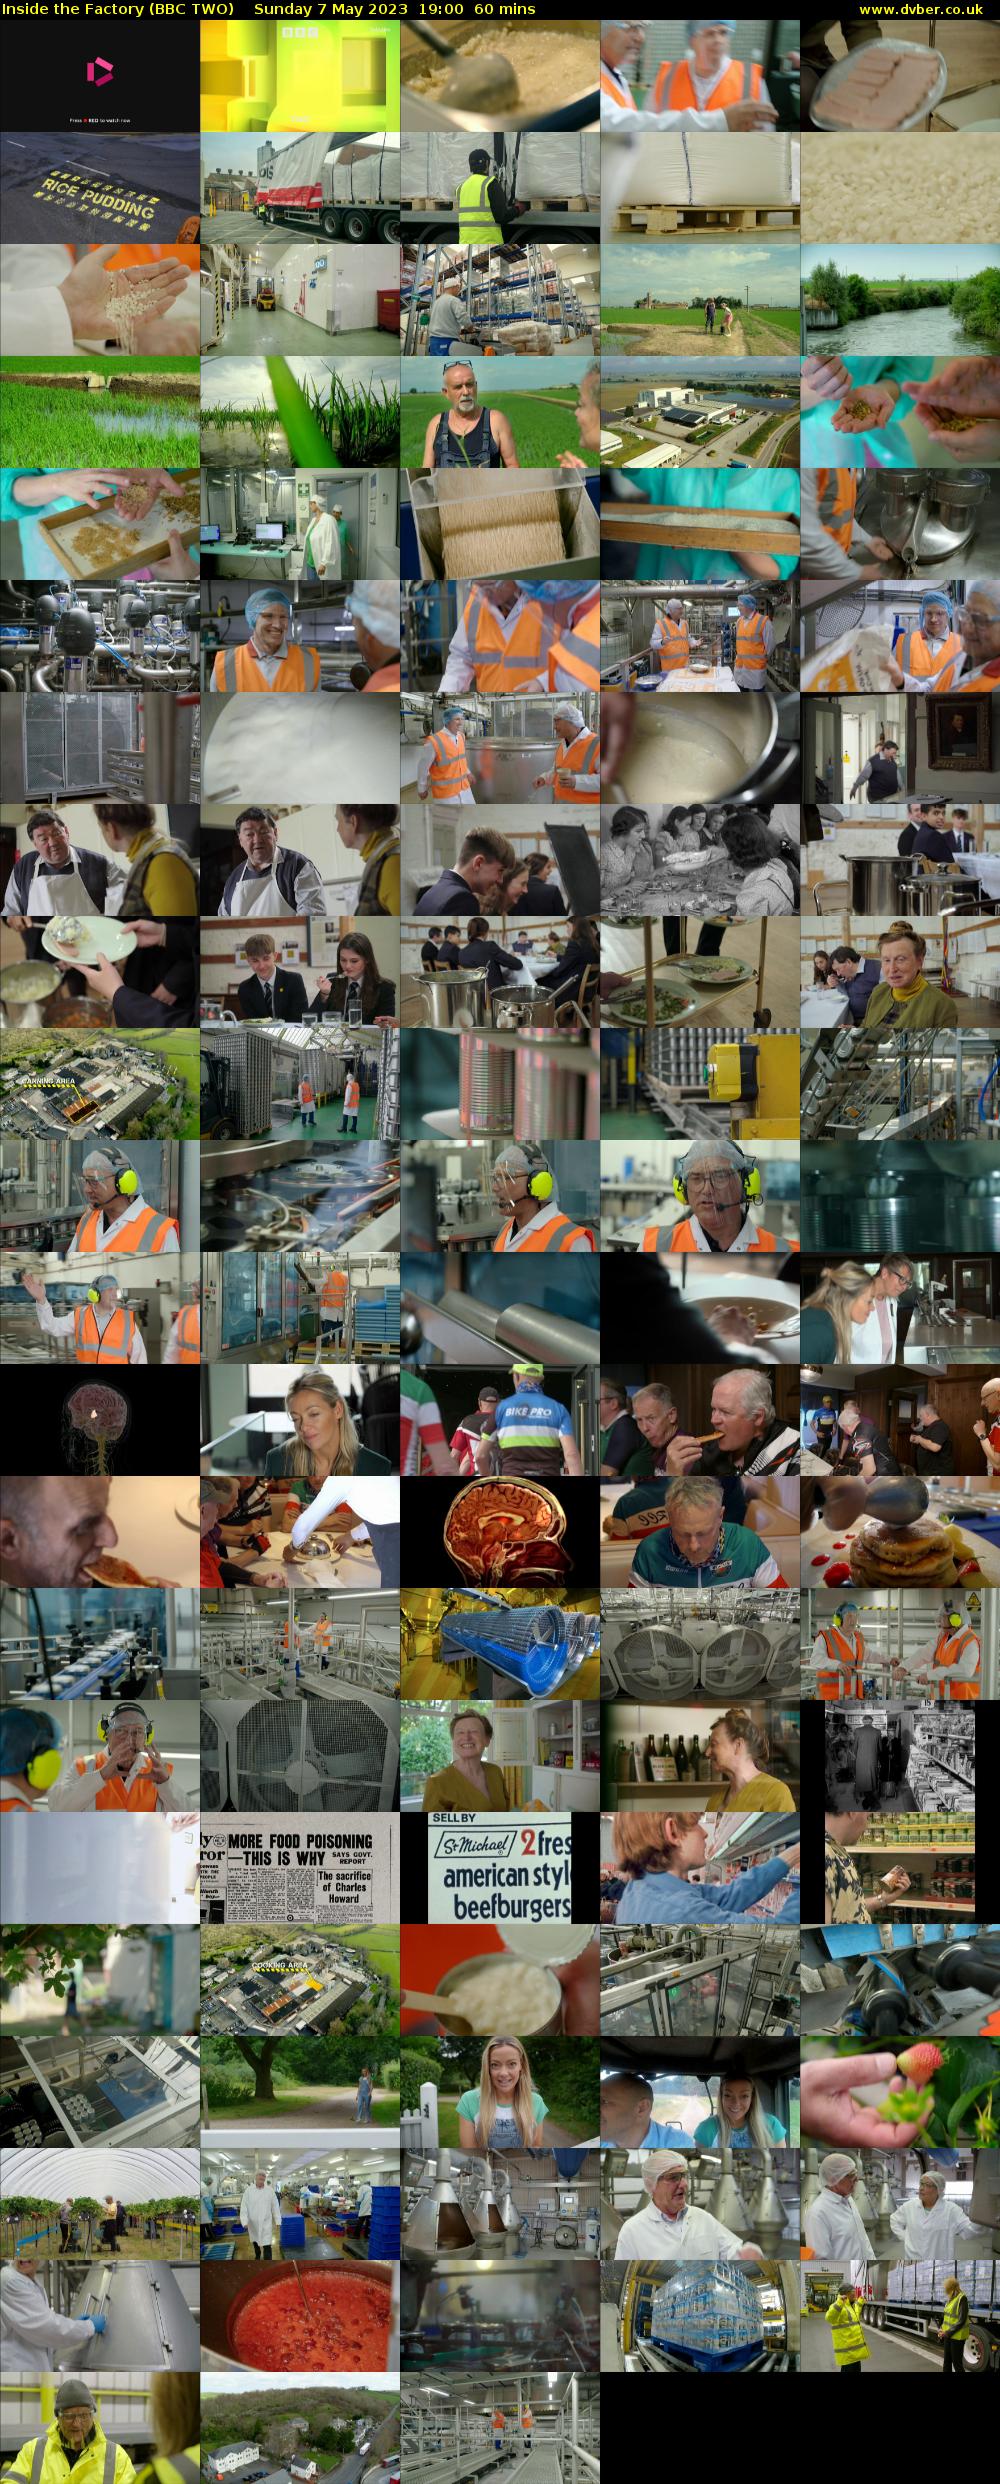 Inside the Factory (BBC TWO) Sunday 7 May 2023 19:00 - 20:00